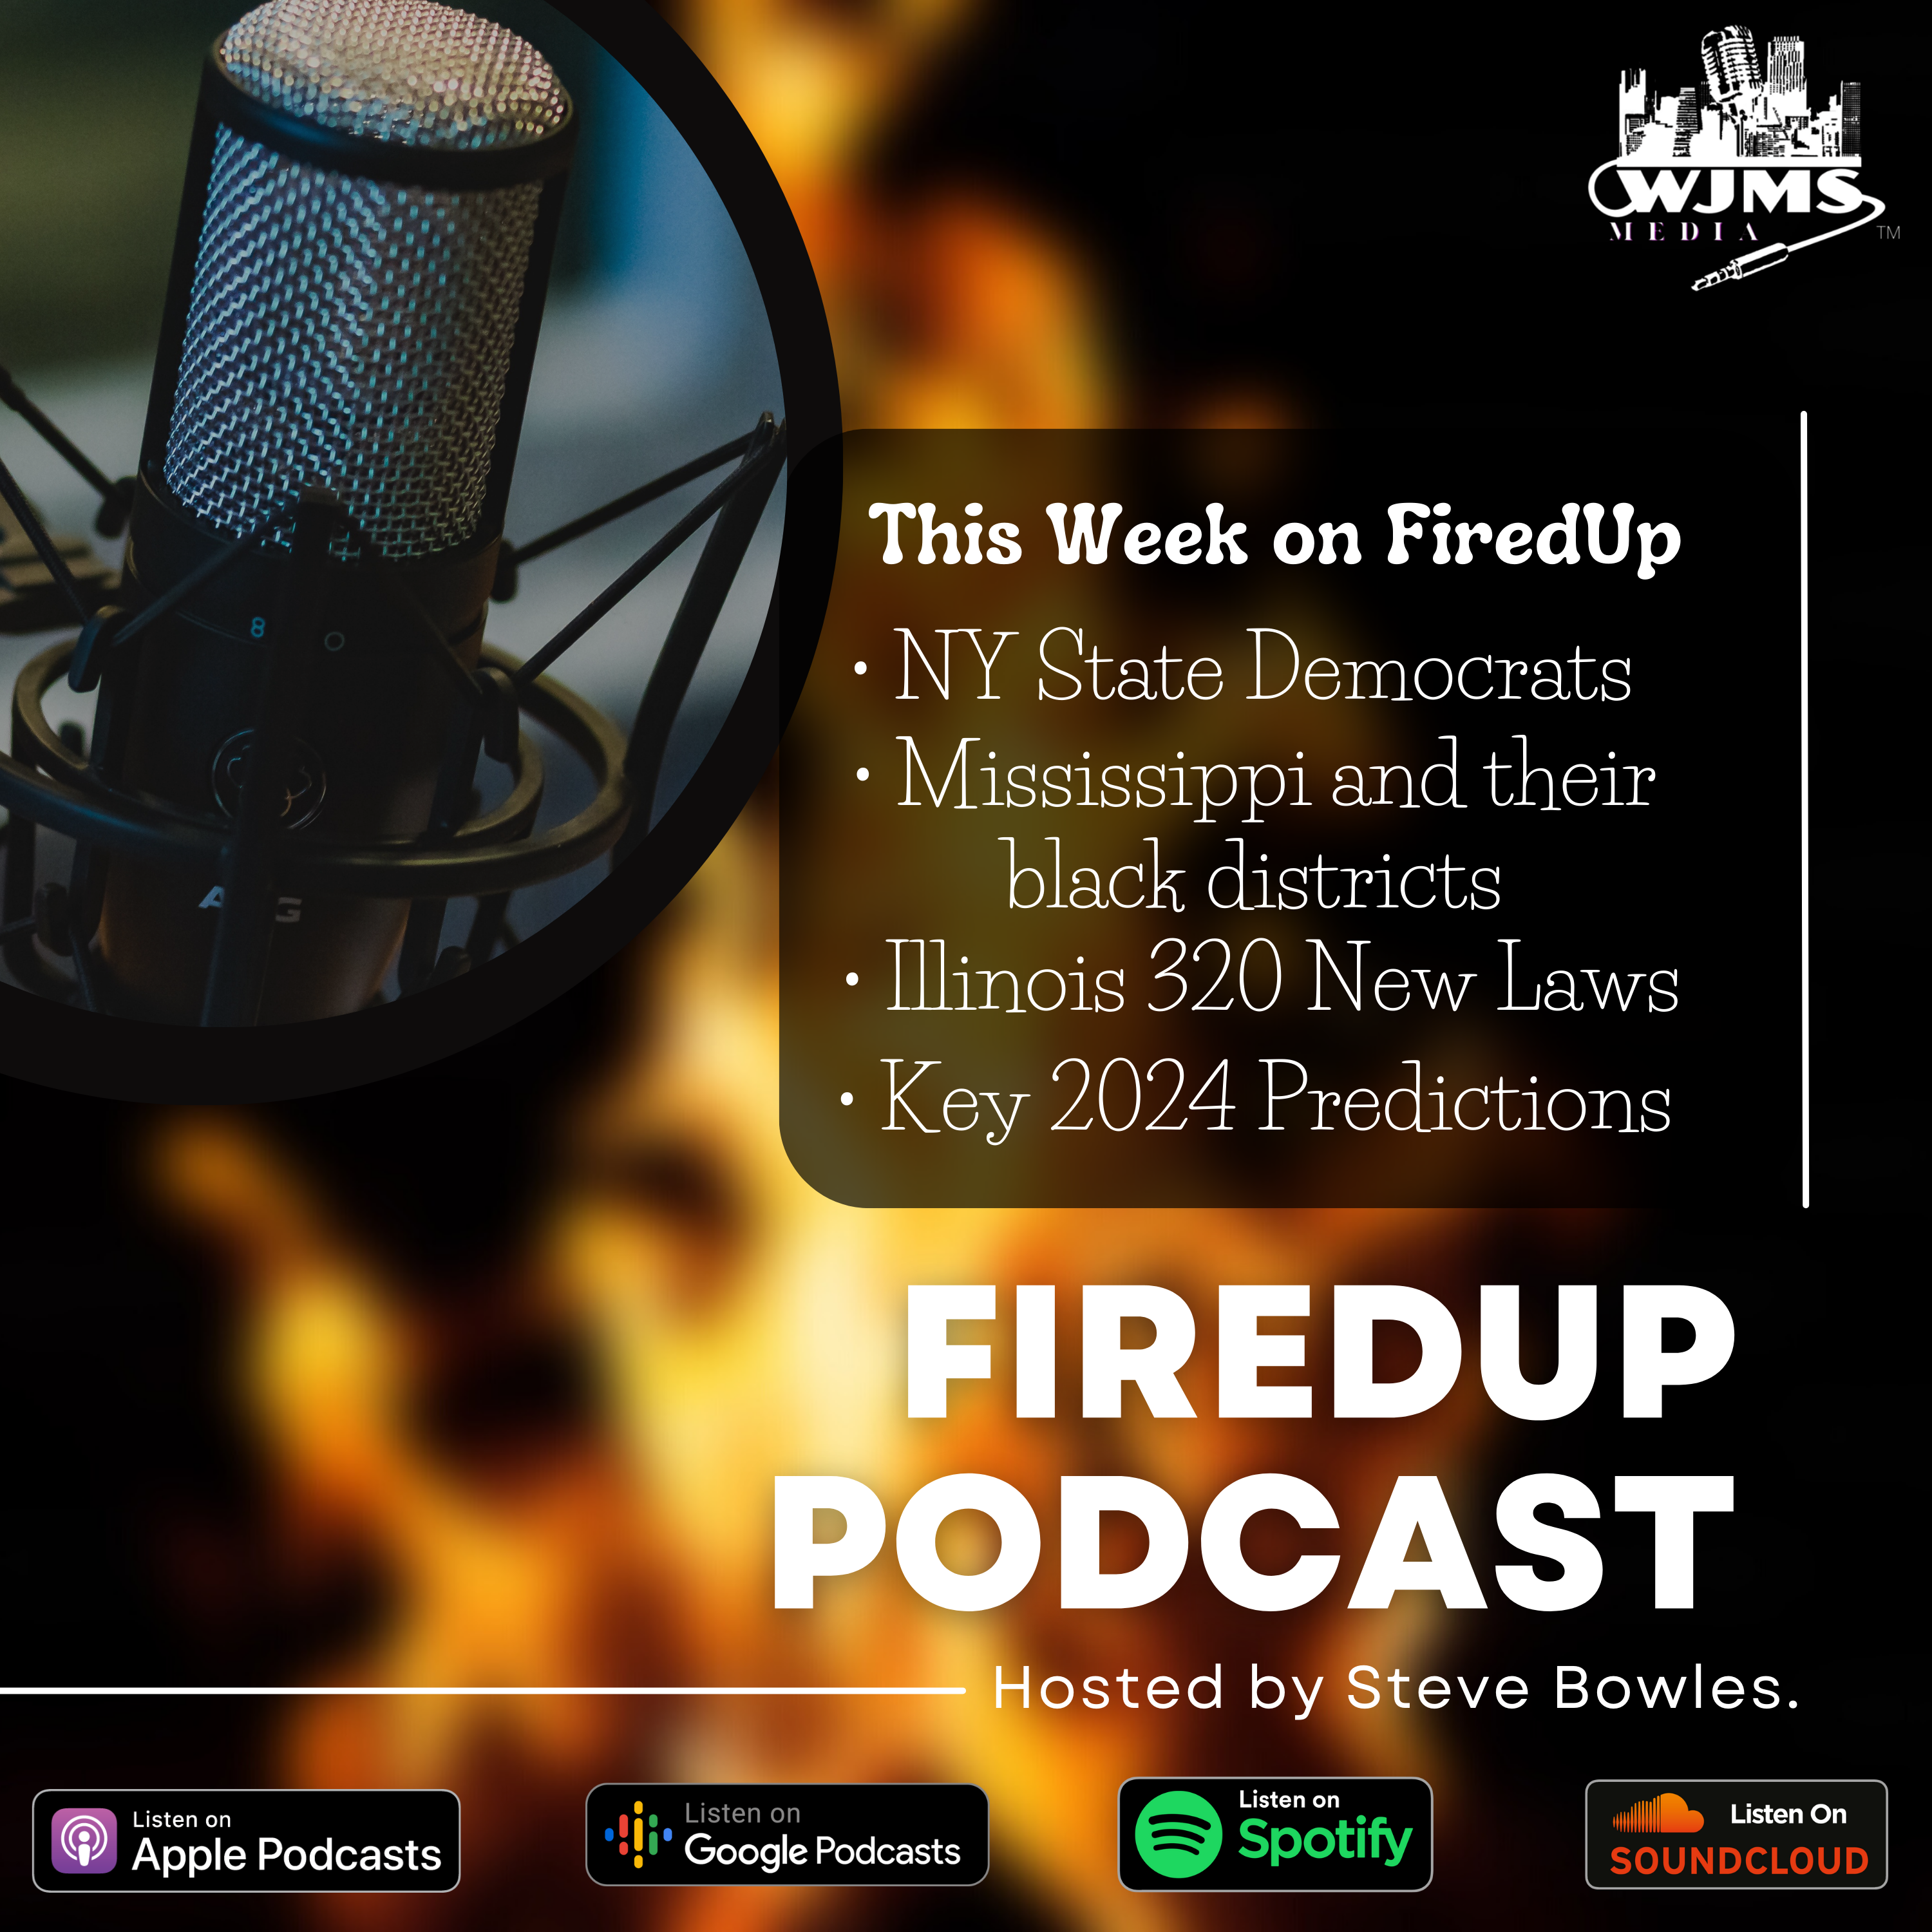 FiredUp Ep  24-201 - Key 2024 Predictions and more